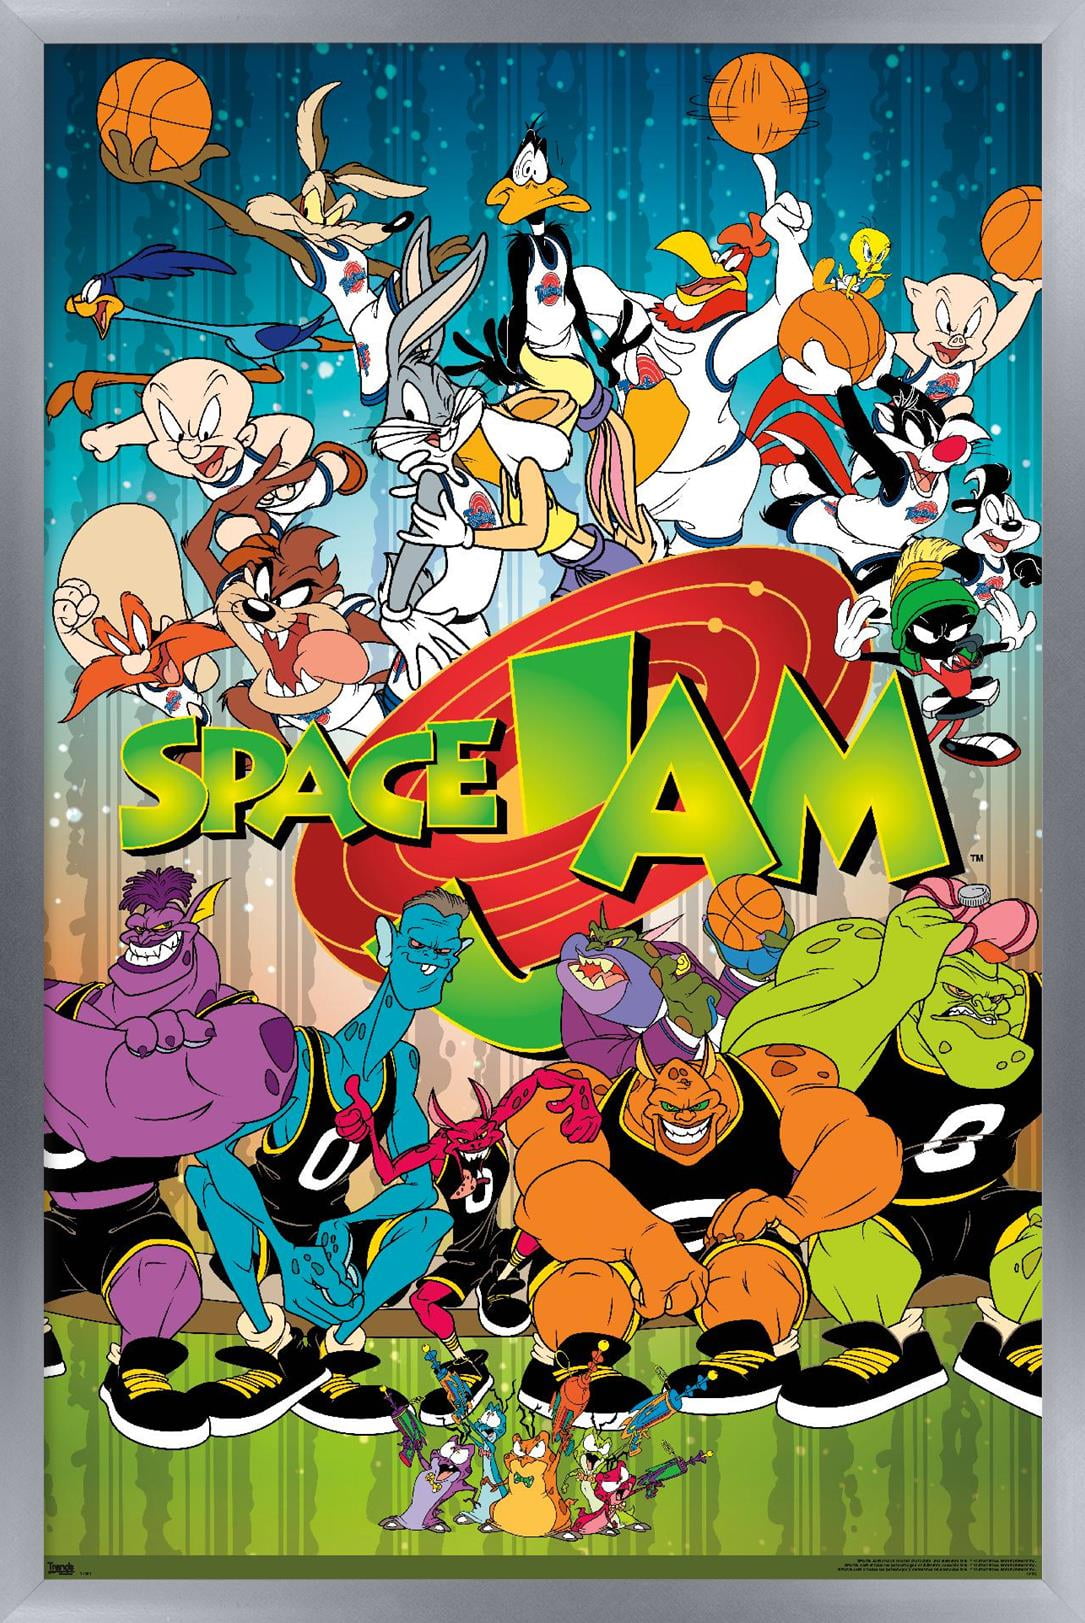 Looney Tunes: Space Jam - Classic Wall Poster, 22.375 x 34, Framed 